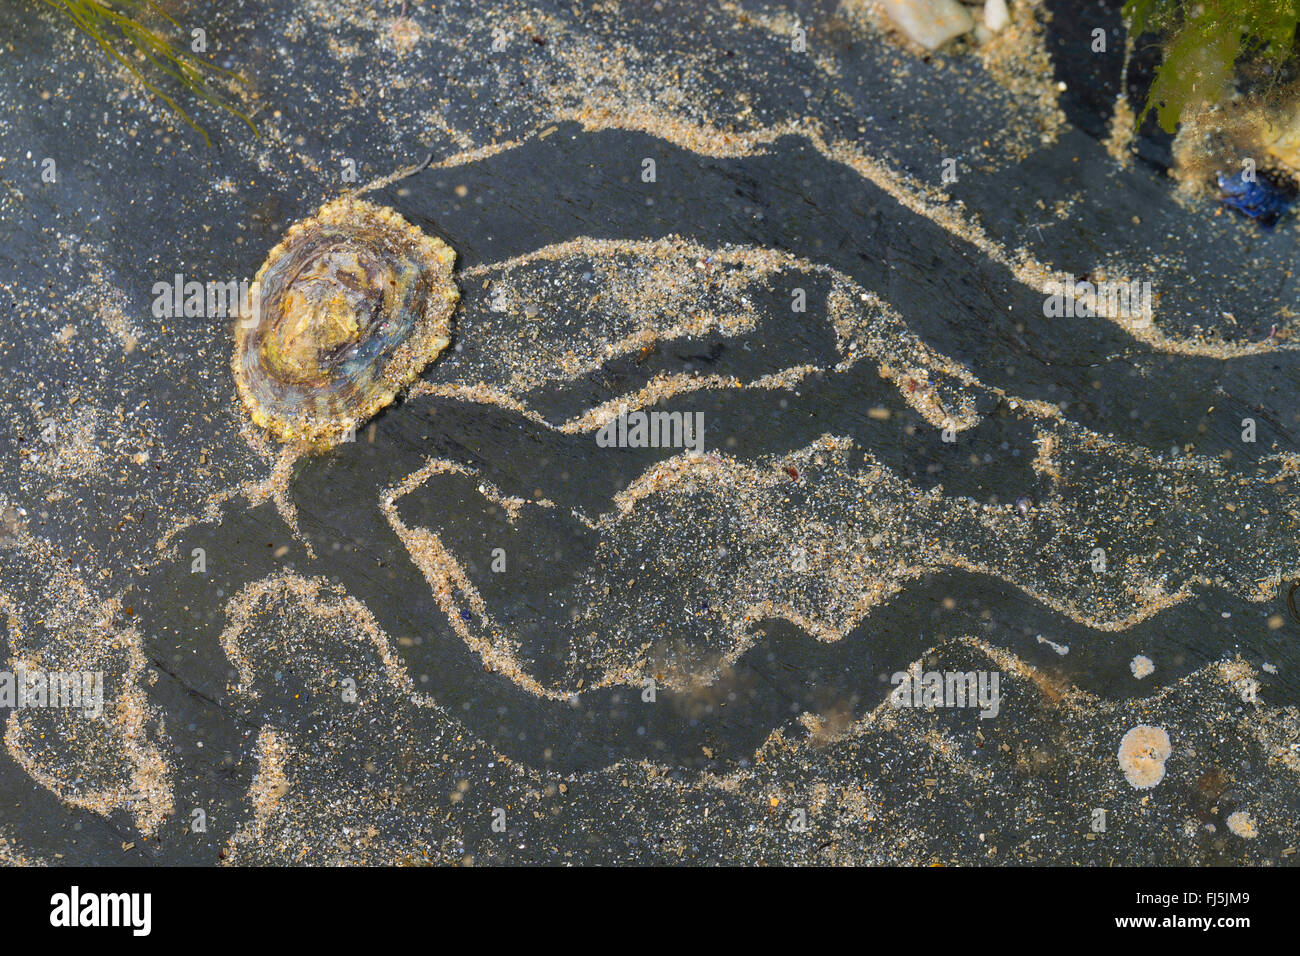 limpets, true limpet (Patella spec.), on a rock at low tide Stock Photo